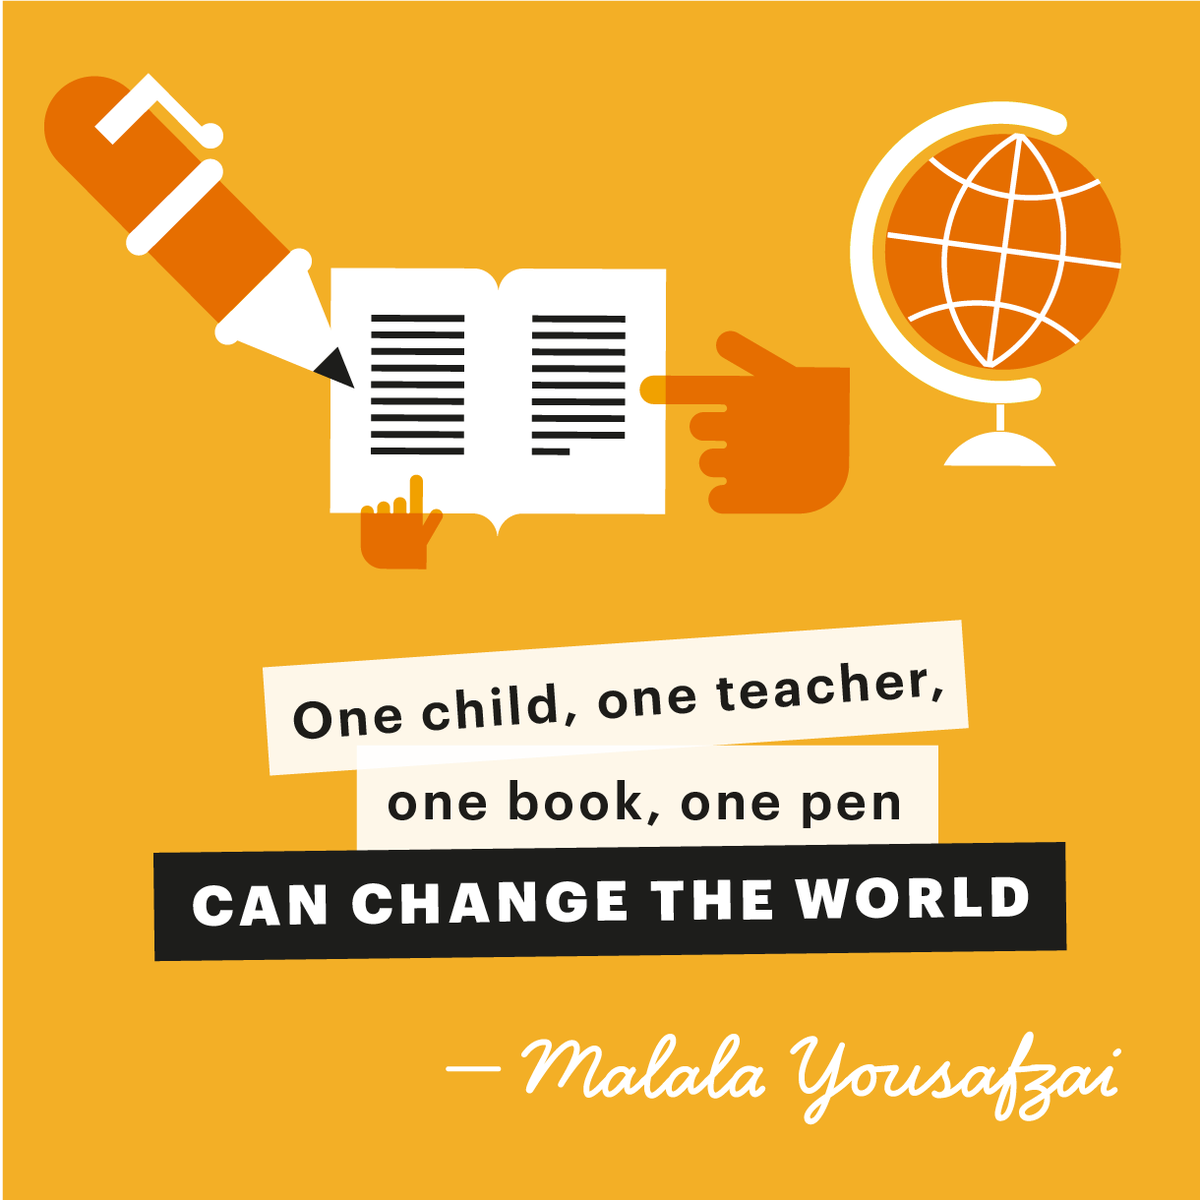 RT @smrtgrls: It's #InternationalLiteracyDay! Knowledge is power and education changes the world ???????? (????: @MalalaFund) http://t.co/BrfSm8FVVG